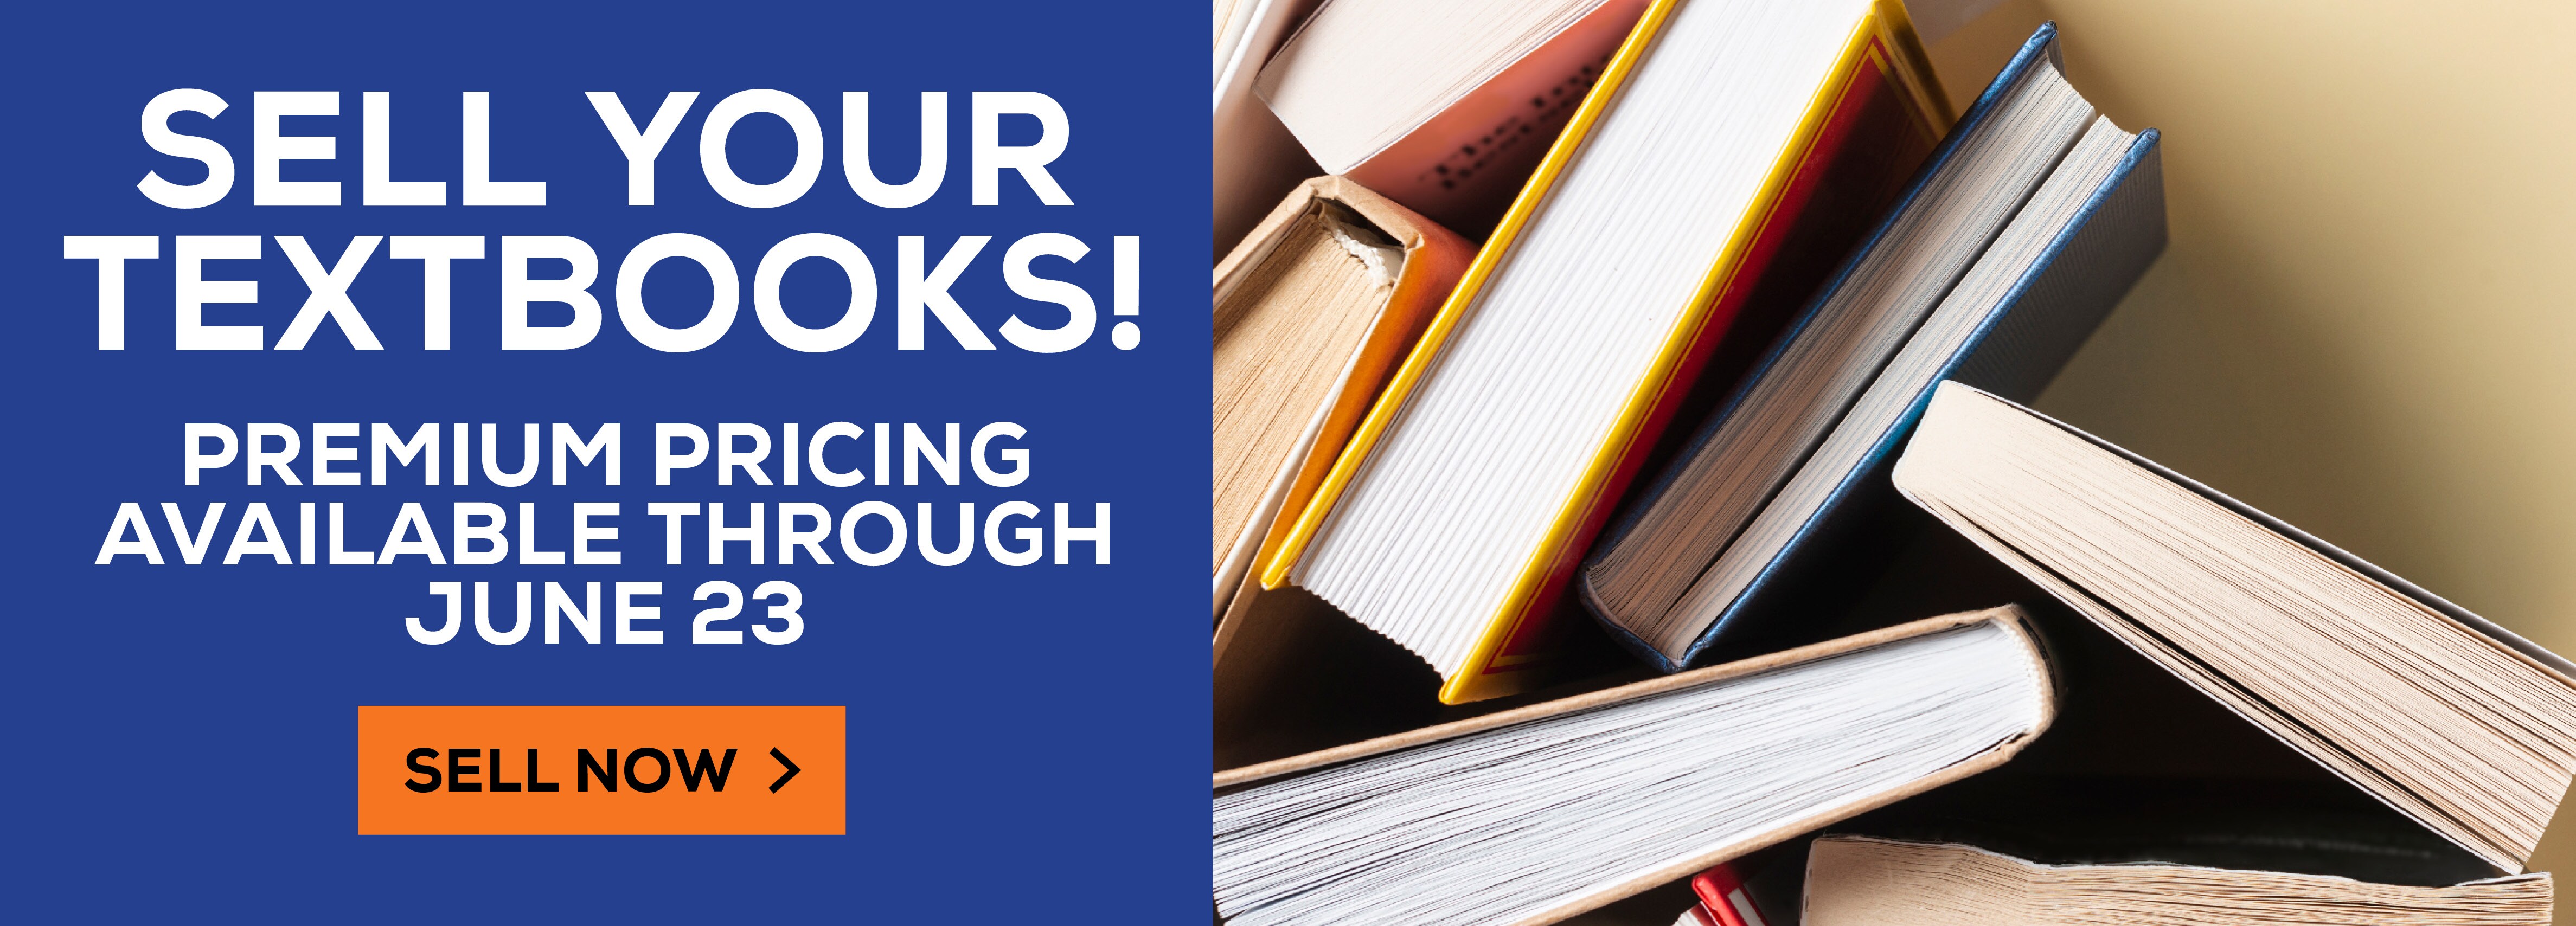 Sell Your Textbooks! Premium pricing available through June 23. Sell Now!					